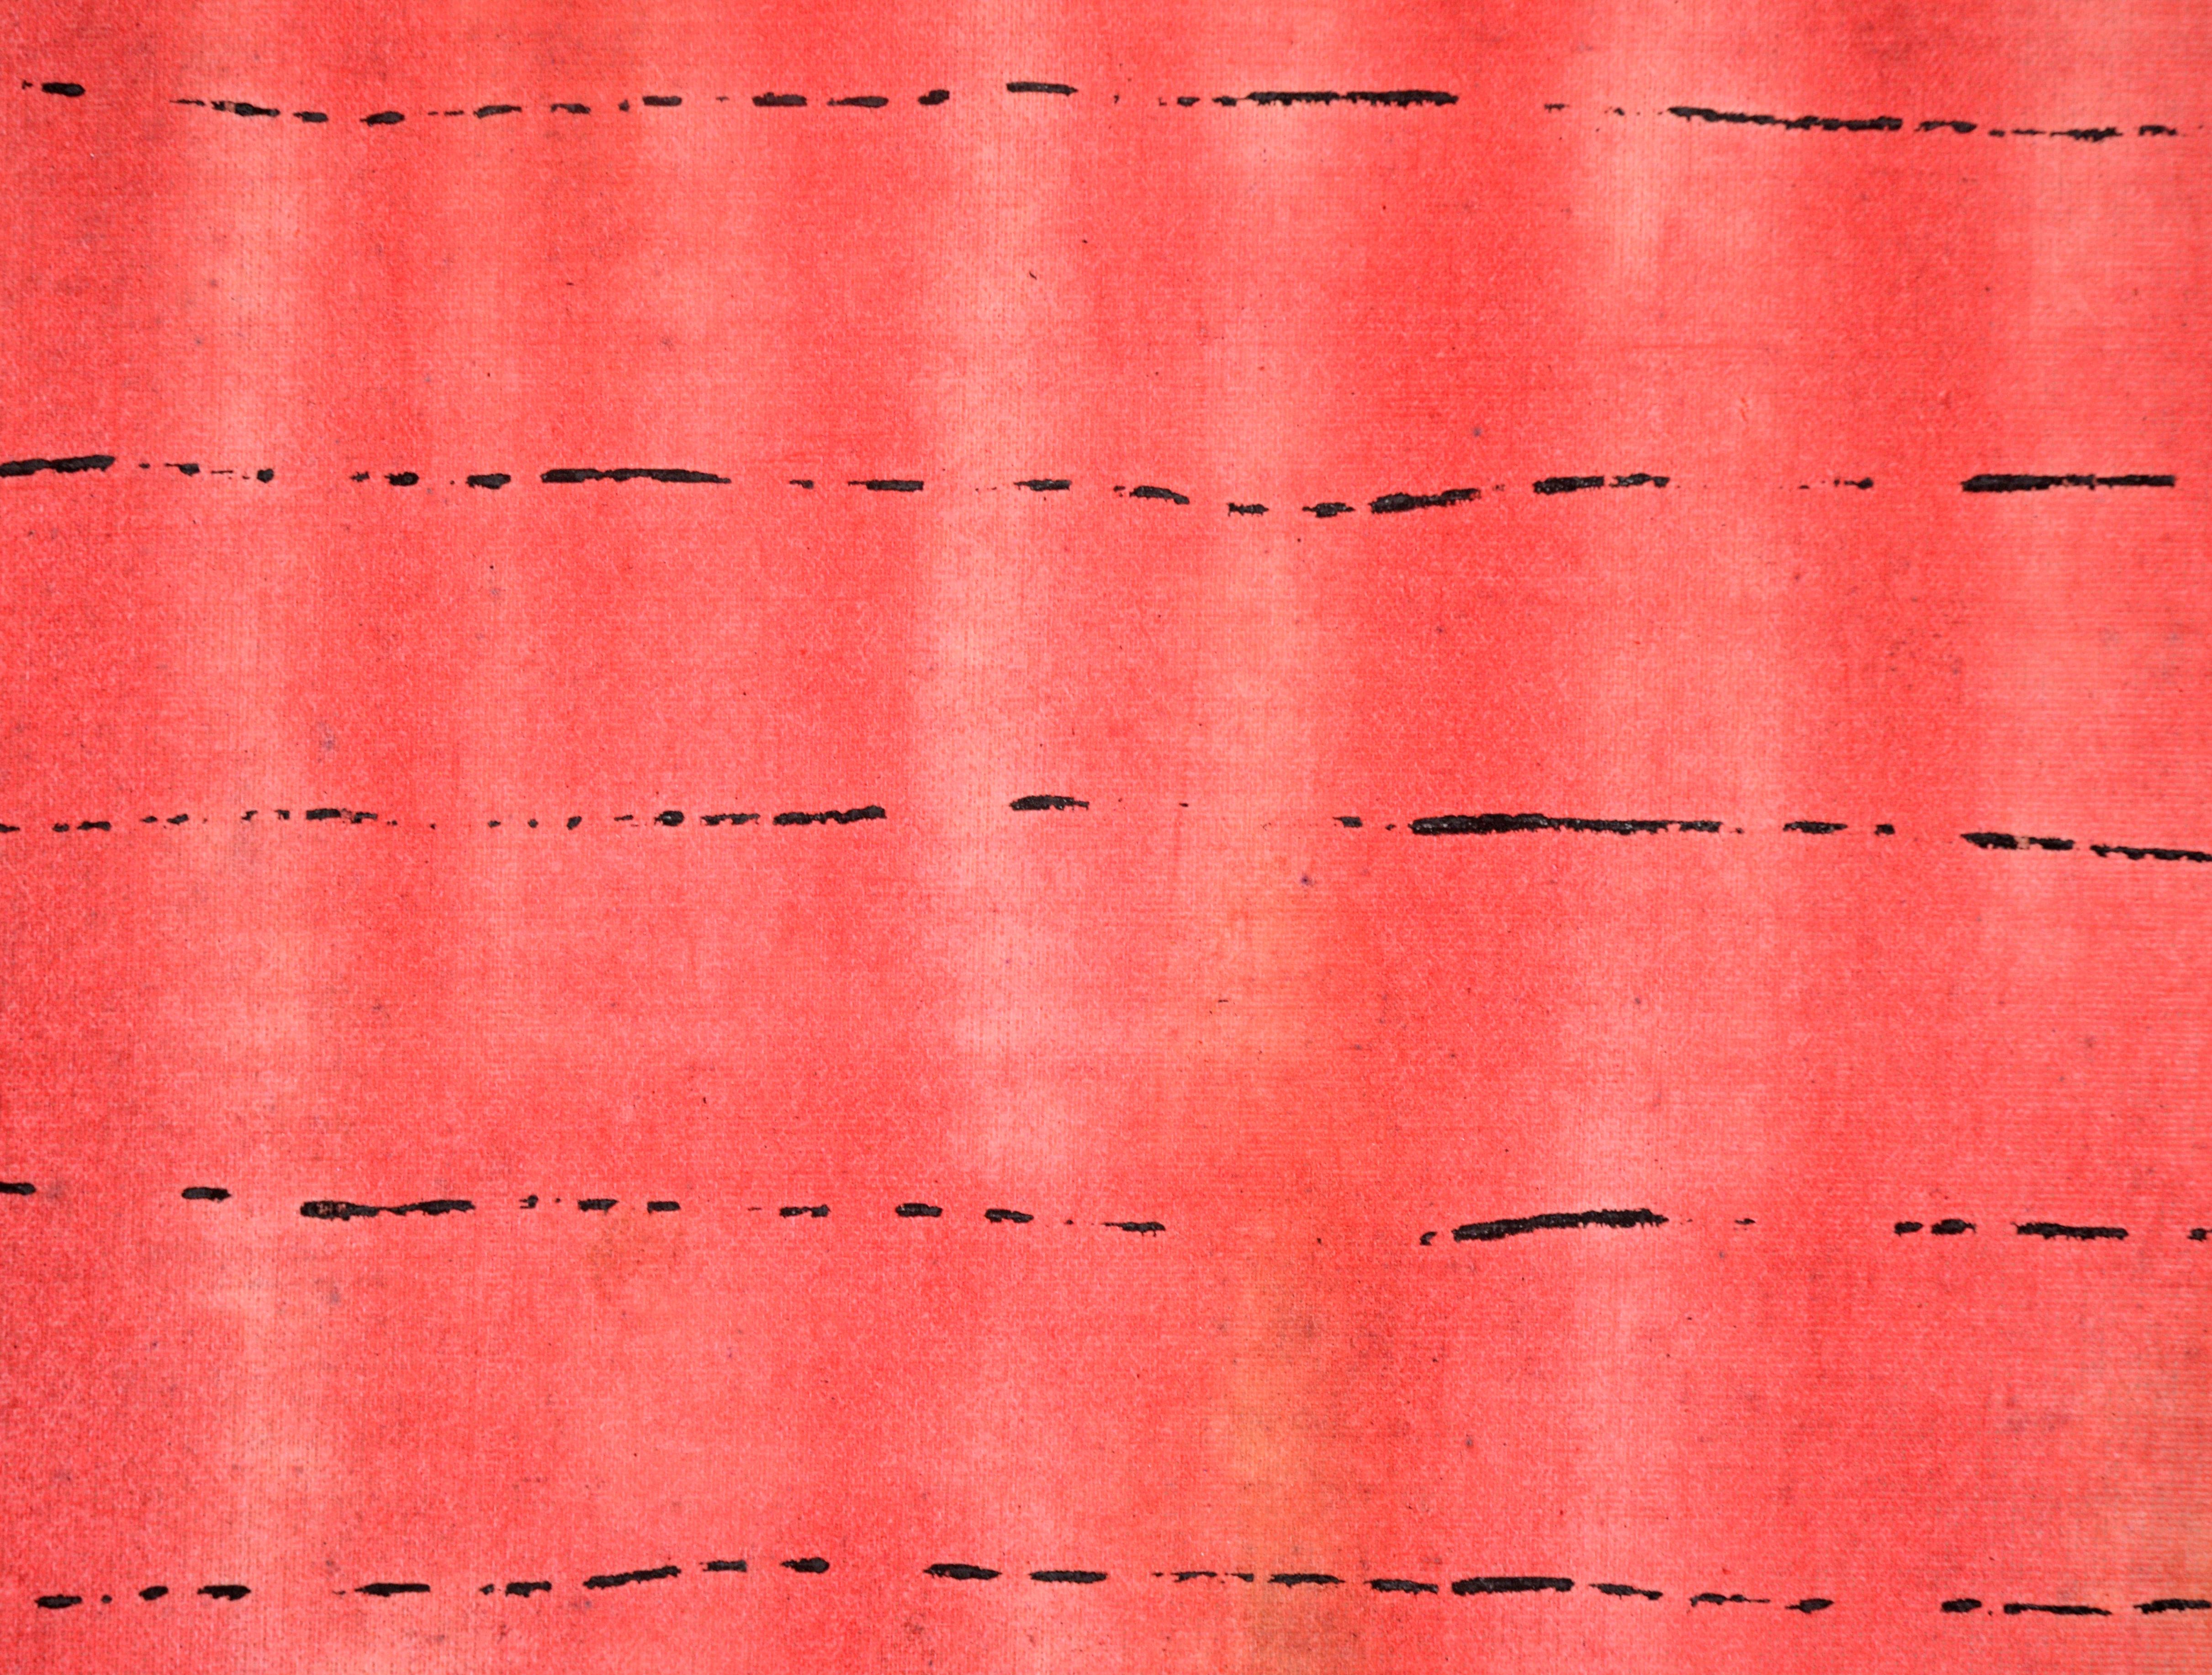 Black Lines Across a Red Field - Abstract Composition on Starched Linen For Sale 3